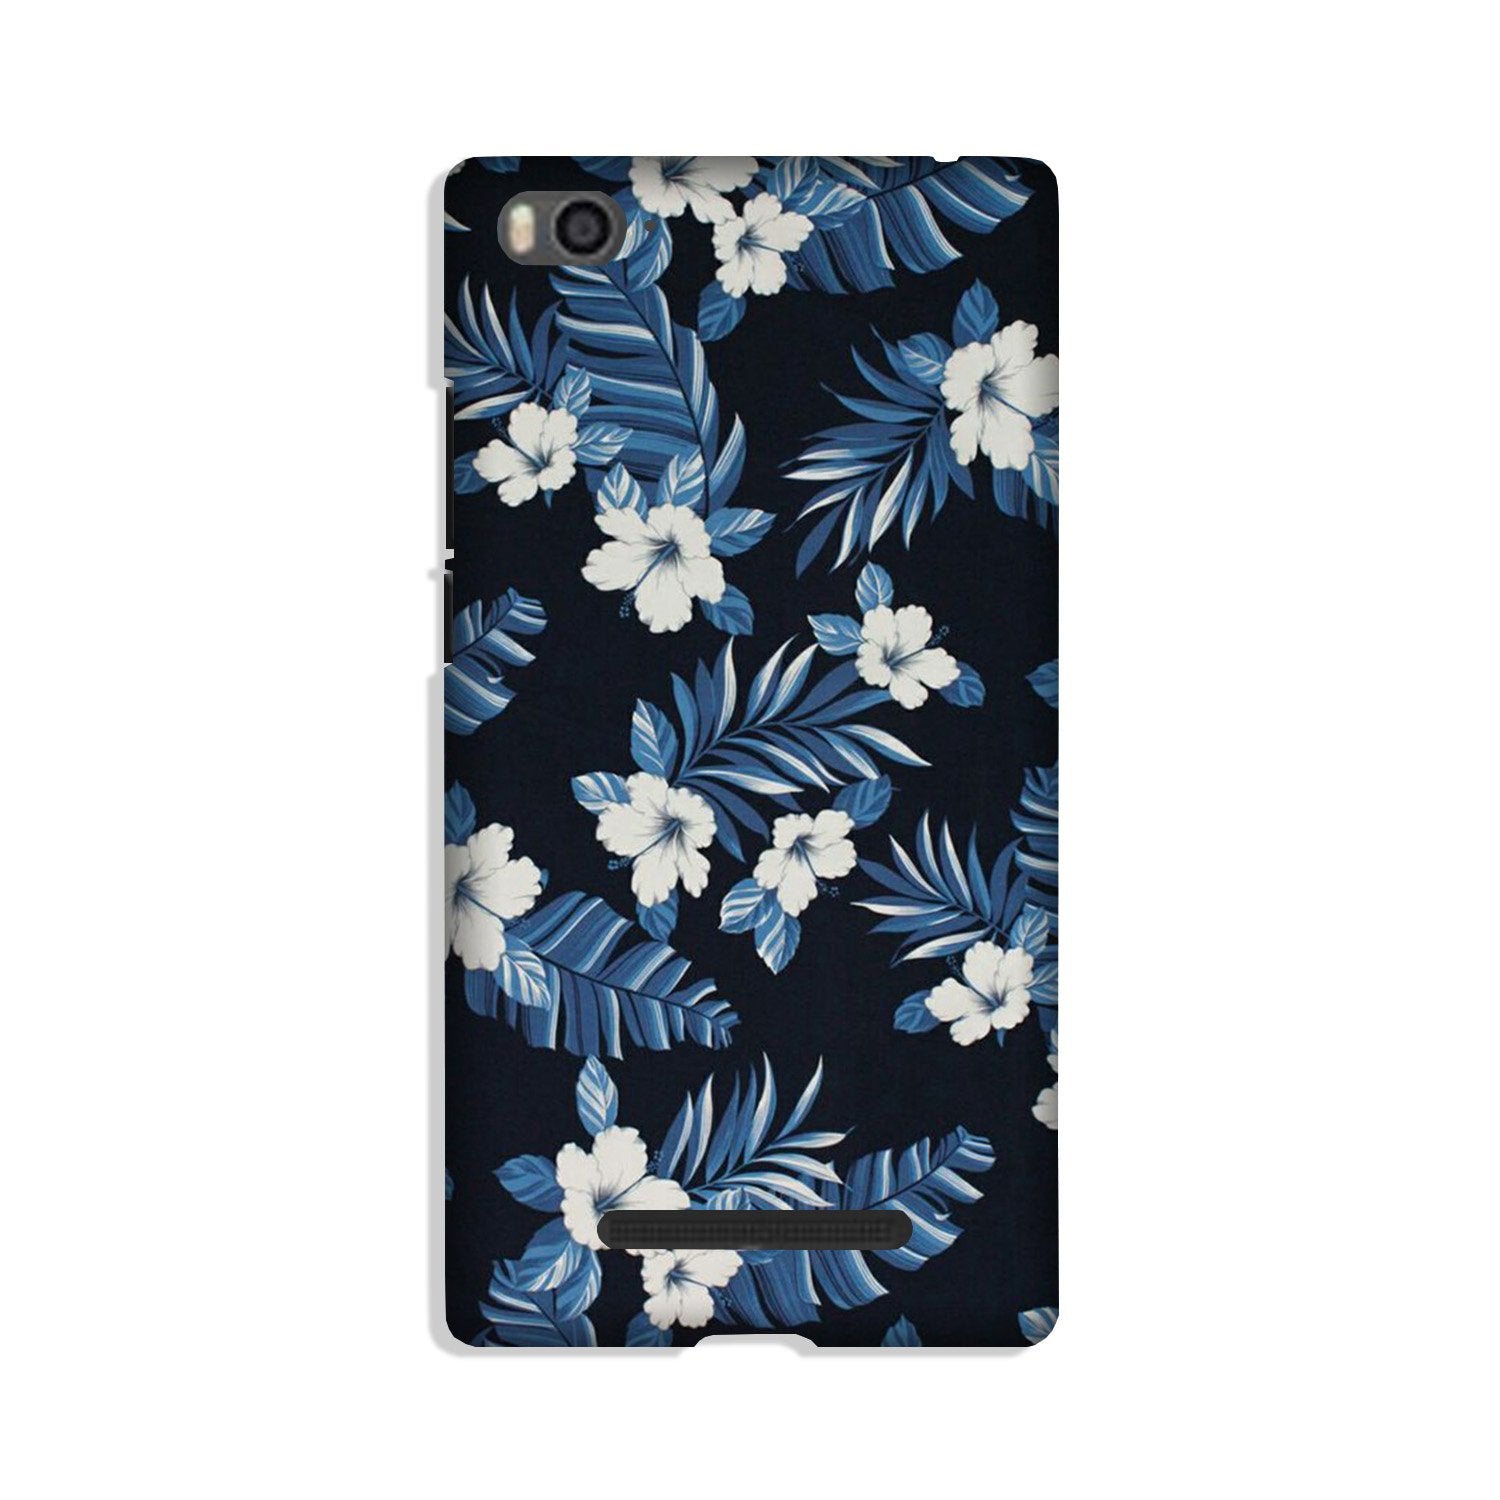 White flowers Blue Background2 Case for Xiaomi Redmi 5A